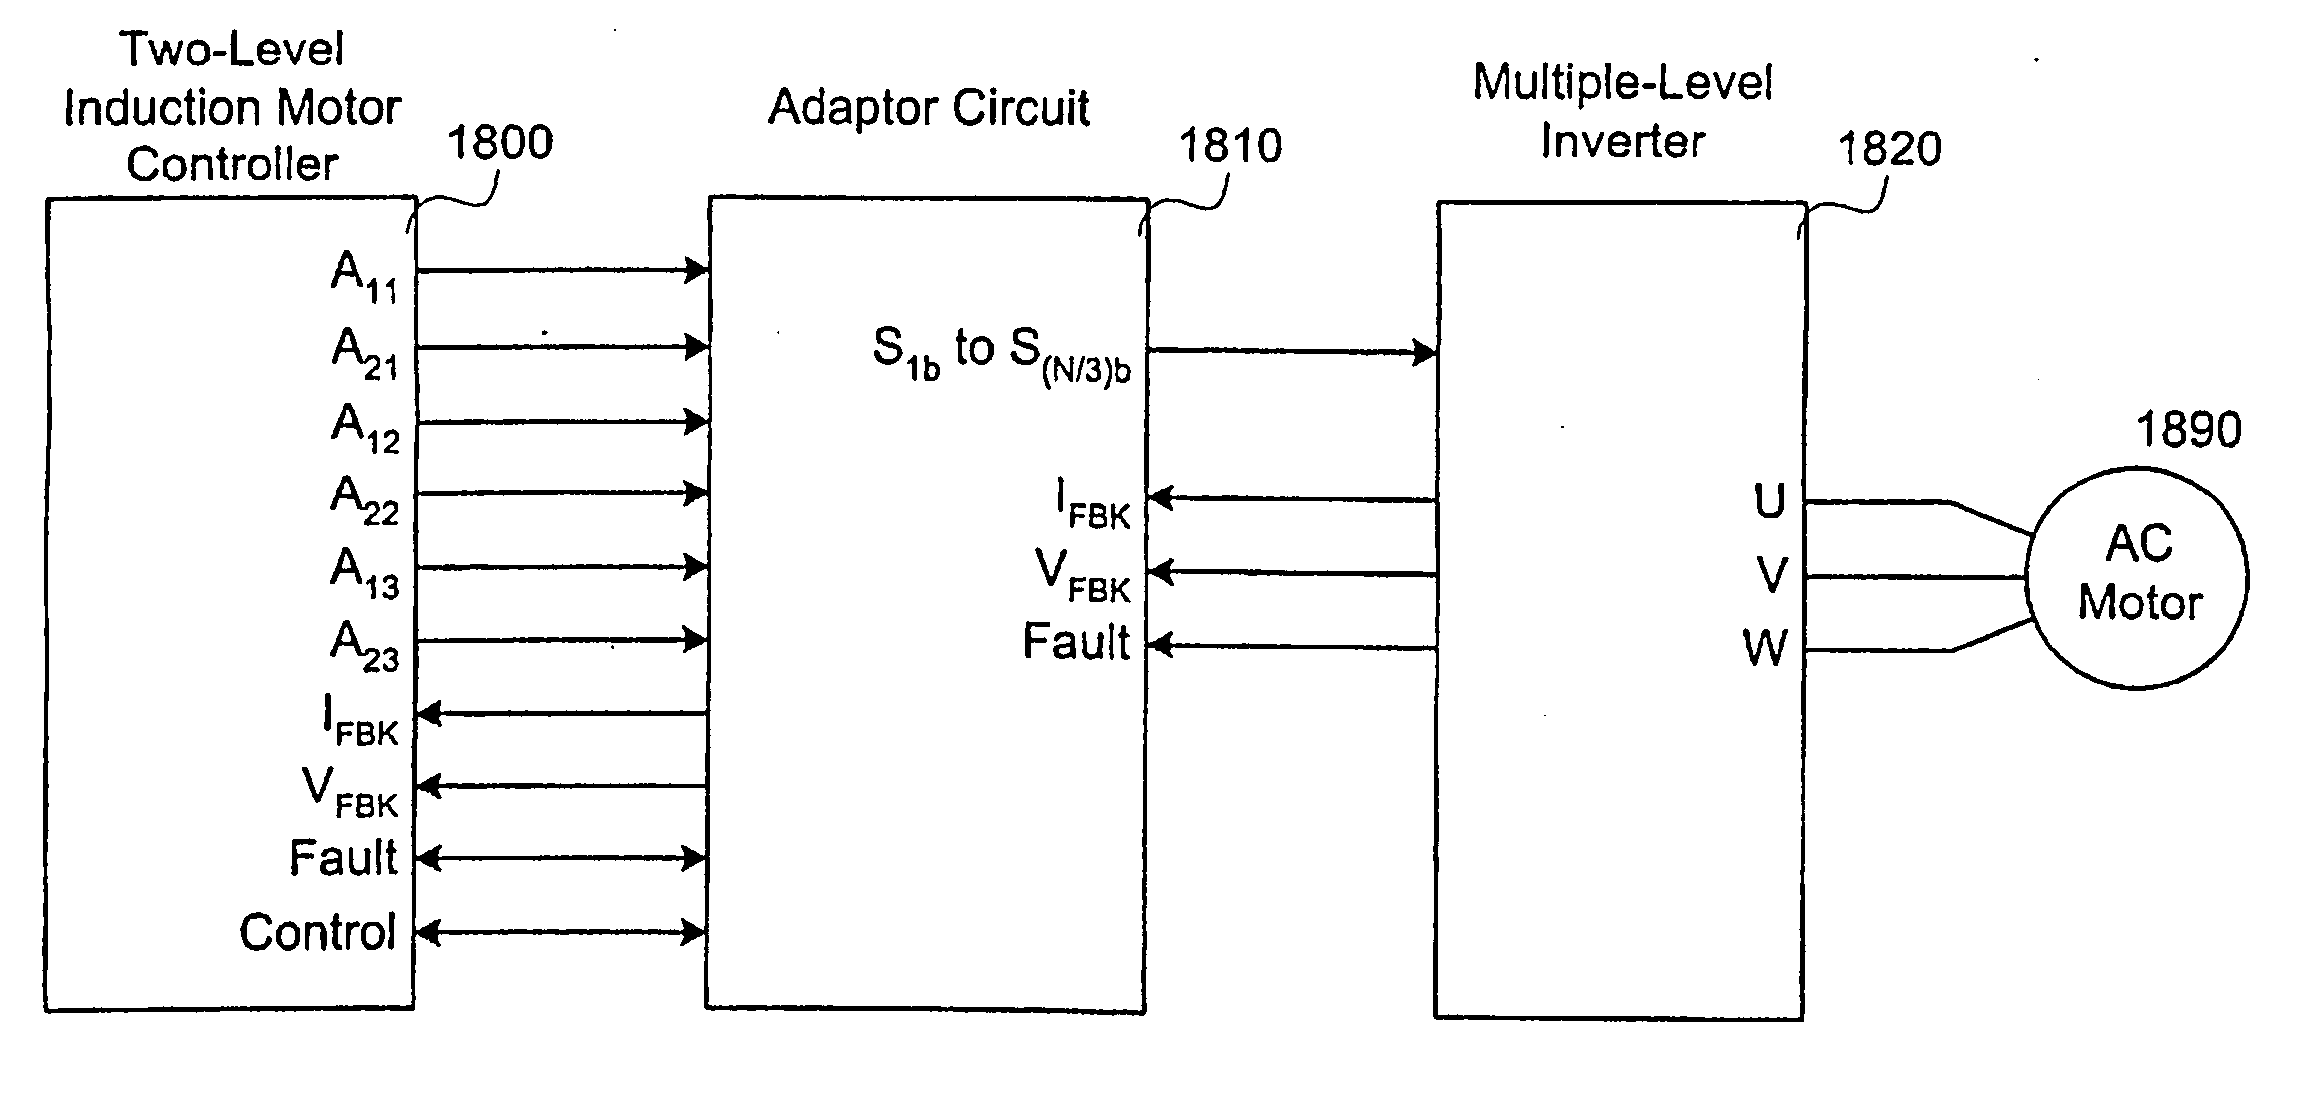 Low voltage, two-level, six-pulse induction motor controller driving a medium-to-high voltage, three-or-more-level ac drive inverter bridge